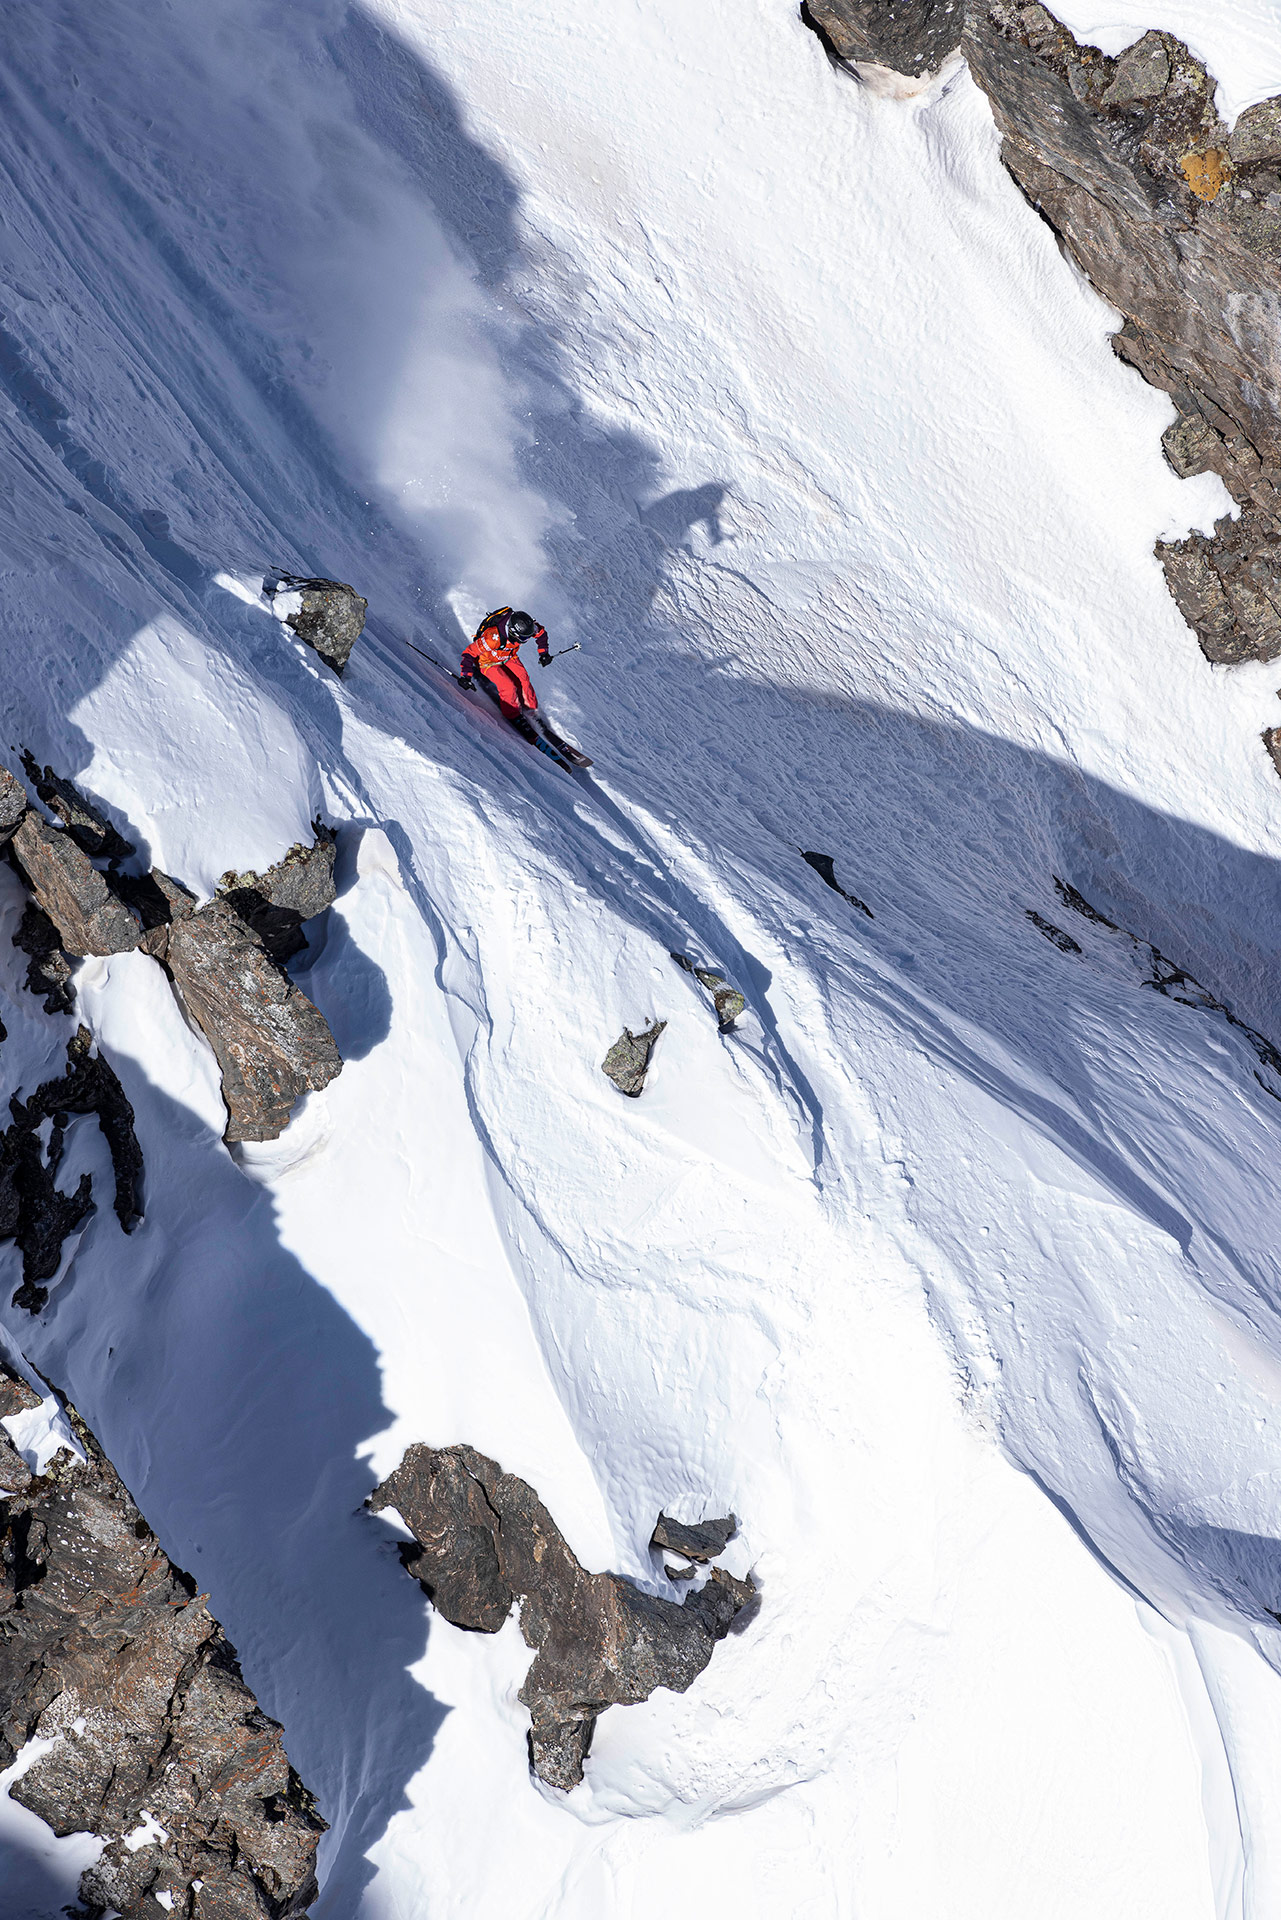 Sybille Blanjean at the 2022 Freeride World Tour finals in Verbier